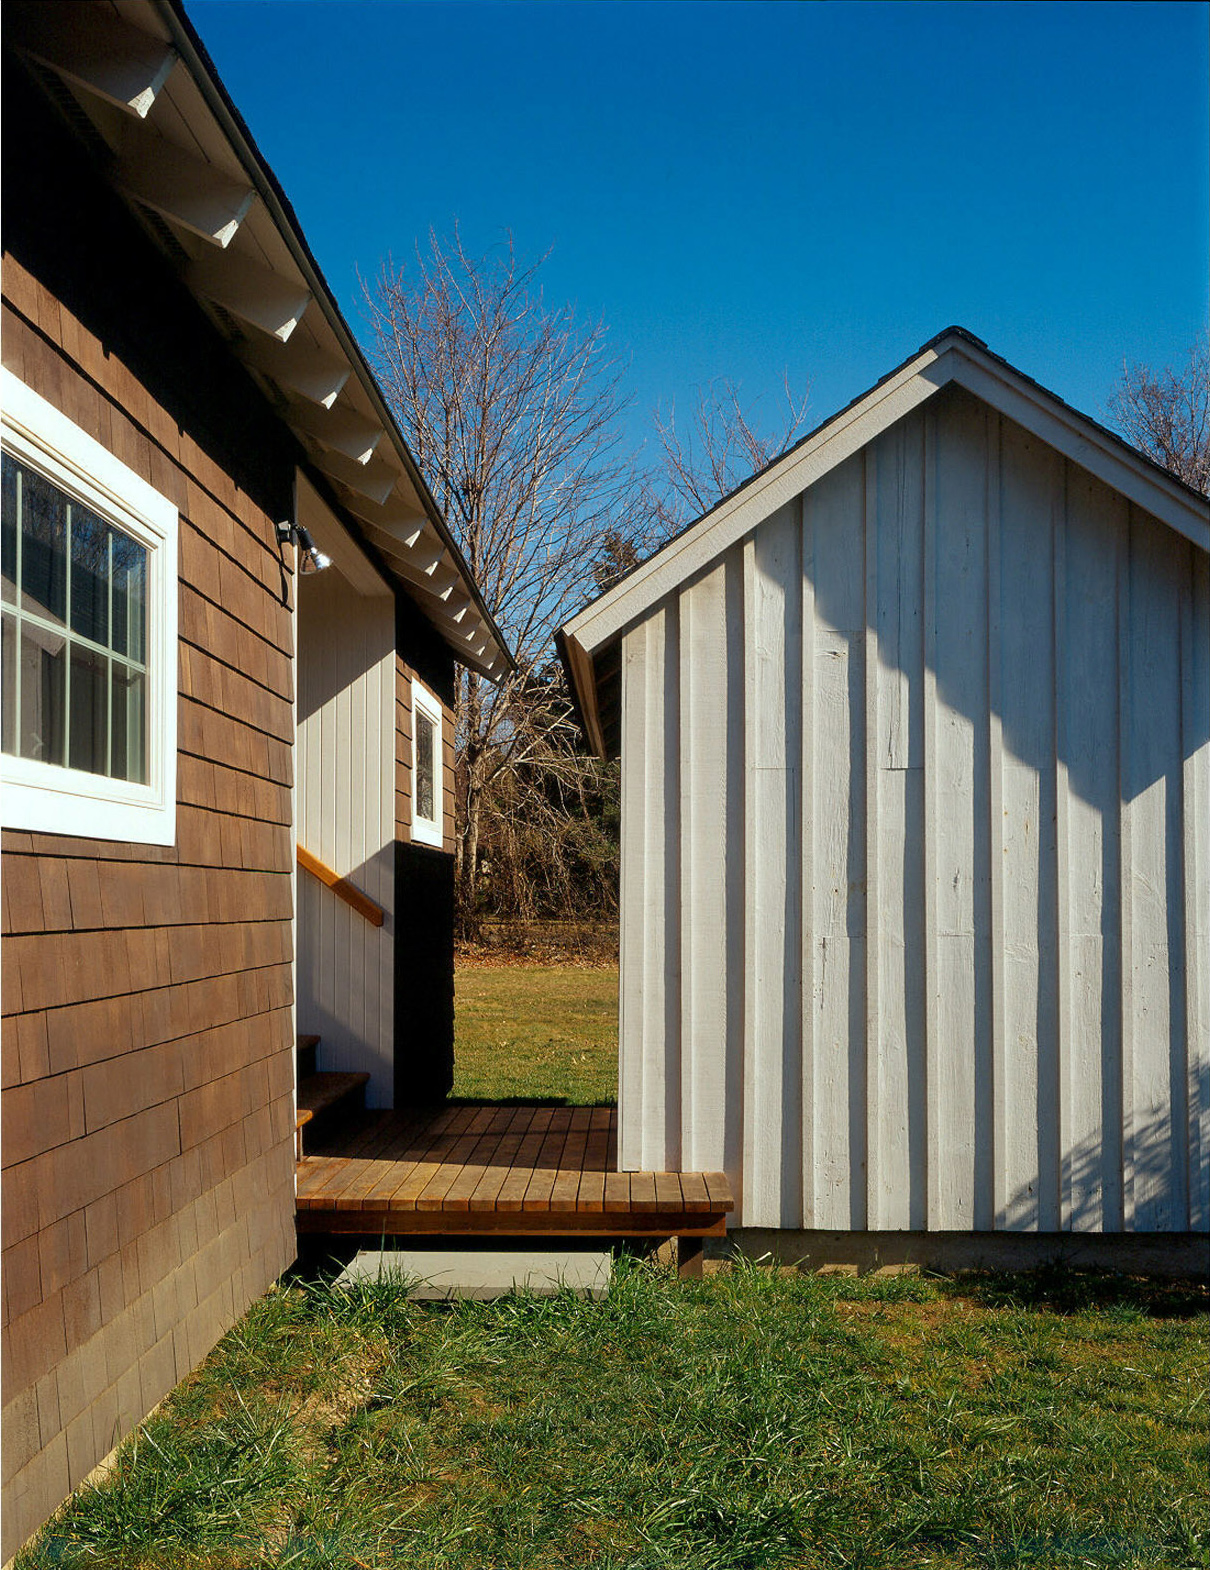  “Semi-Enclosed Patio” between Shed and Barn 